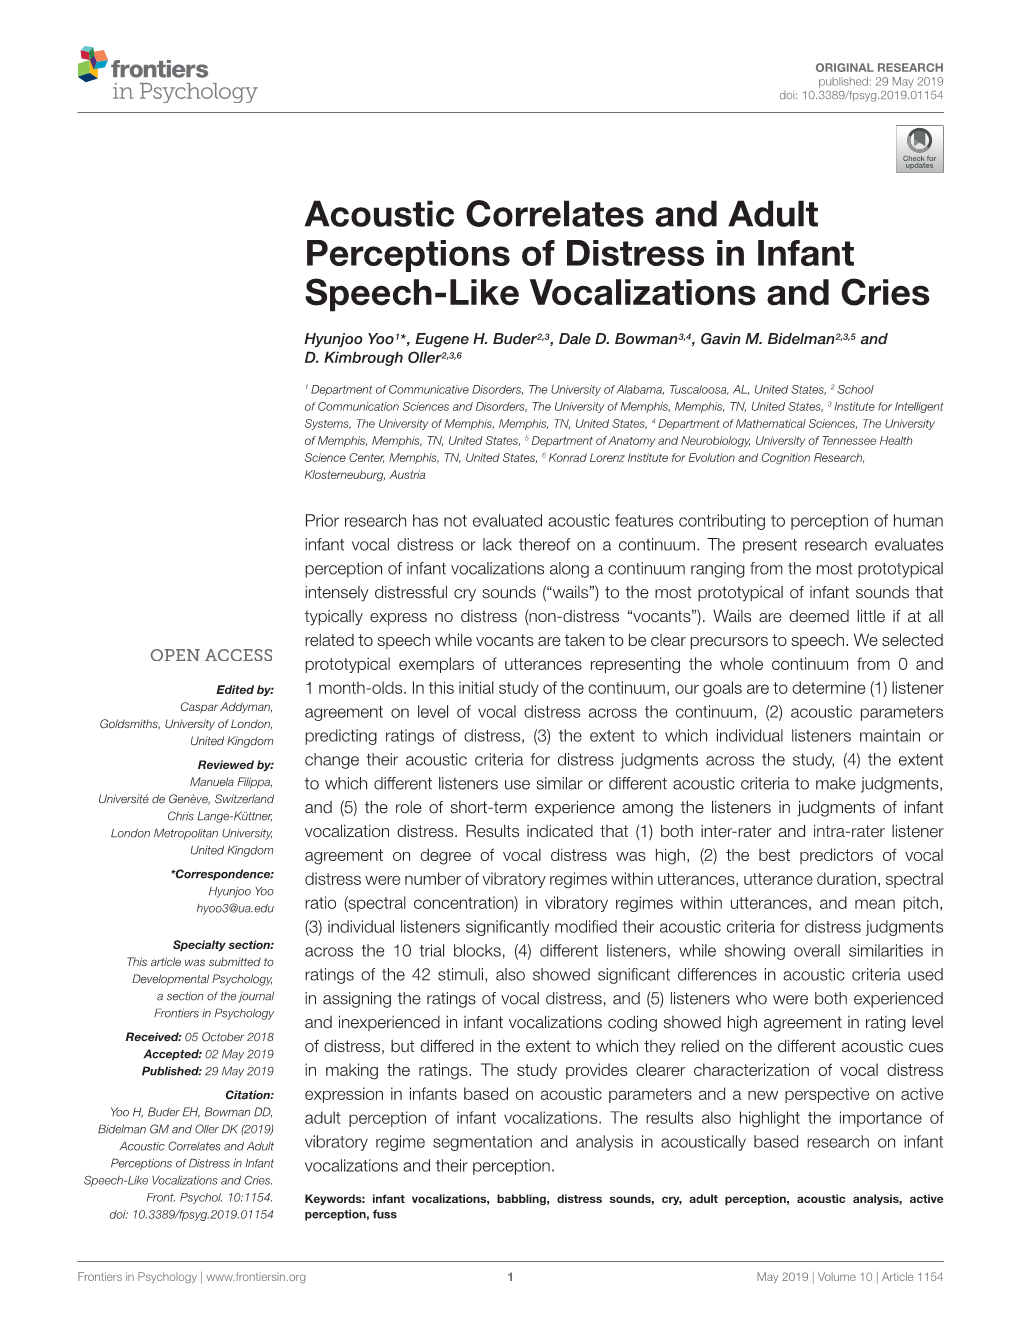 Acoustic Correlates and Adult Perceptions of Distress in Infant Speech-Like Vocalizations and Cries